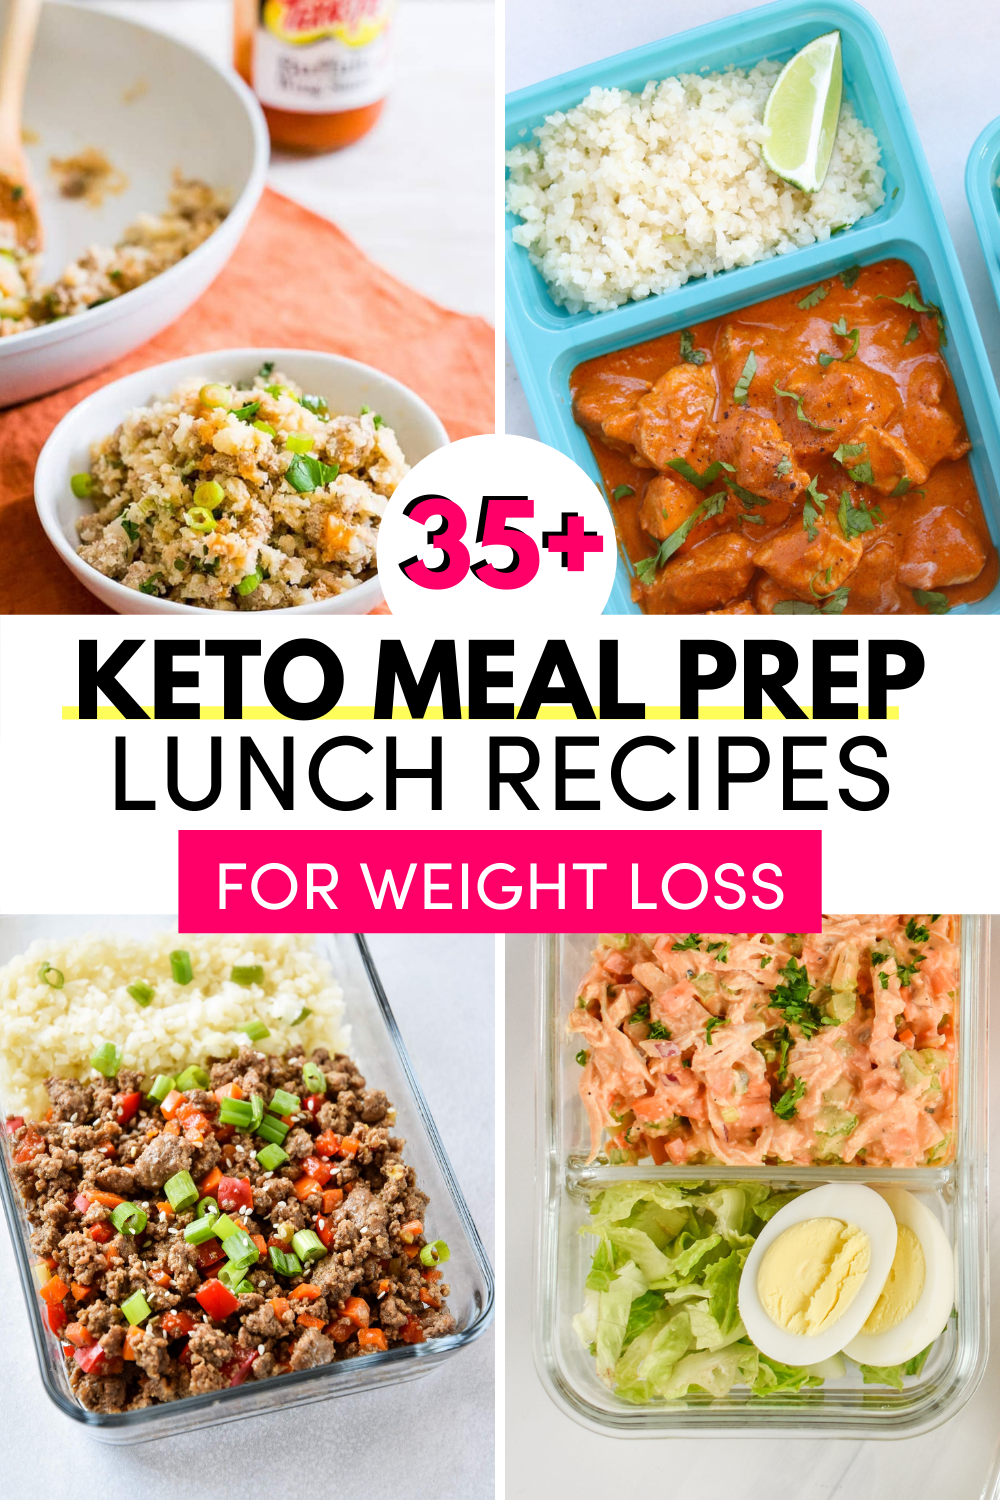 Keto Meal Prep Recipes For Weight Loss